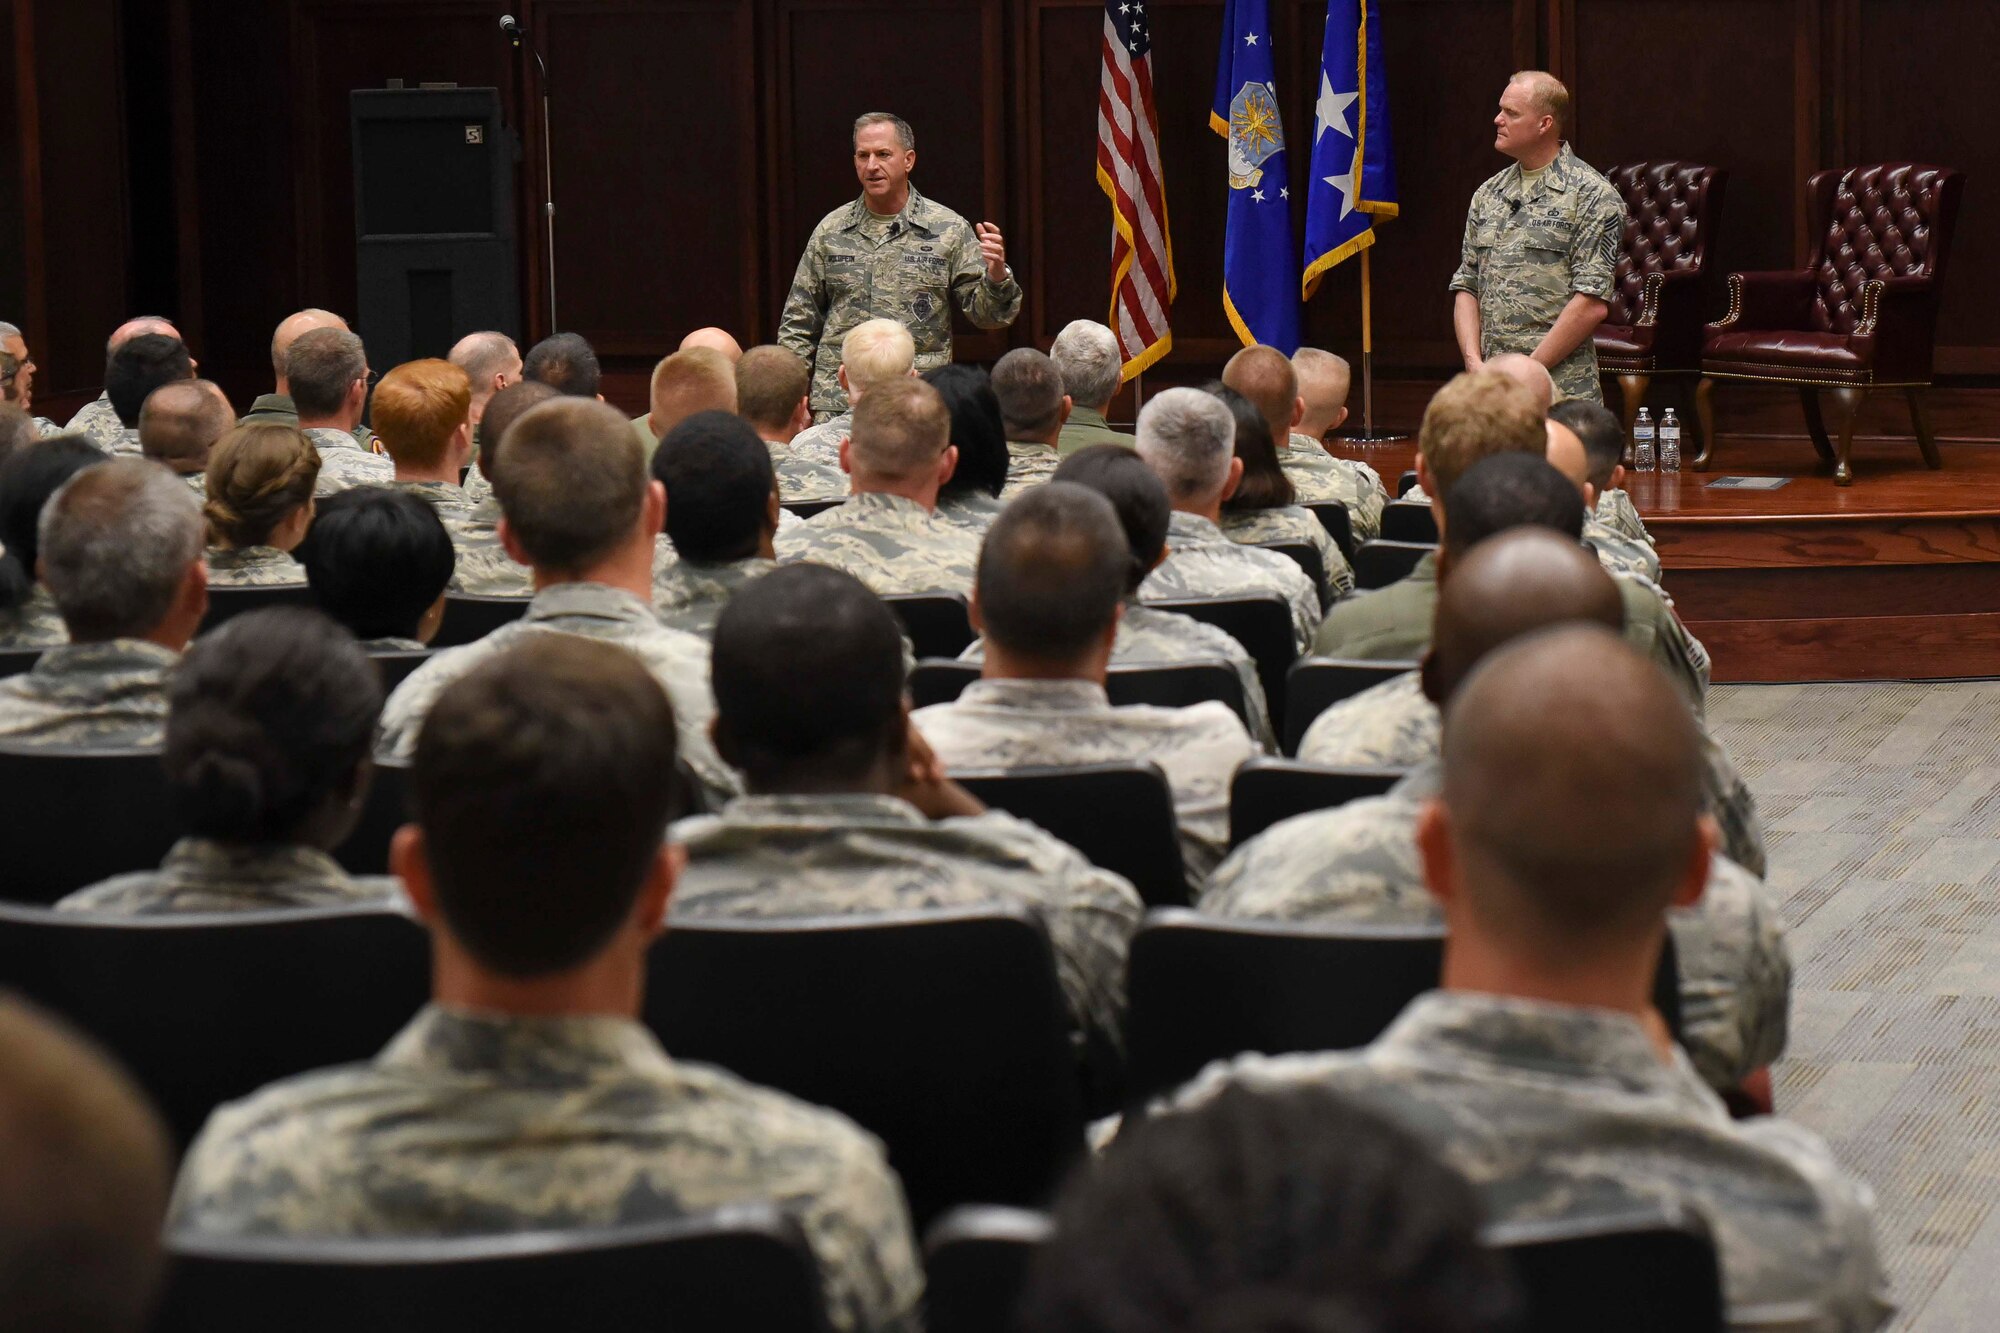 Gen. David L. Goldfein, Chief of Staff of the Air Force, and Chief Master Sgt. James A. Cody, Chief Master Sgt. of the Air Force, address Airmen of the 187th Fighter Wing during an all-call July 19, 2016 at the Montgomery Regional Air National Guard Base. The visit was a chance for Goldfein and Cody to see the wing's mission, meet Airmen, and thank them for their service. (U.S. Air National Guard photo by Airman First Class Hayden Johnson)